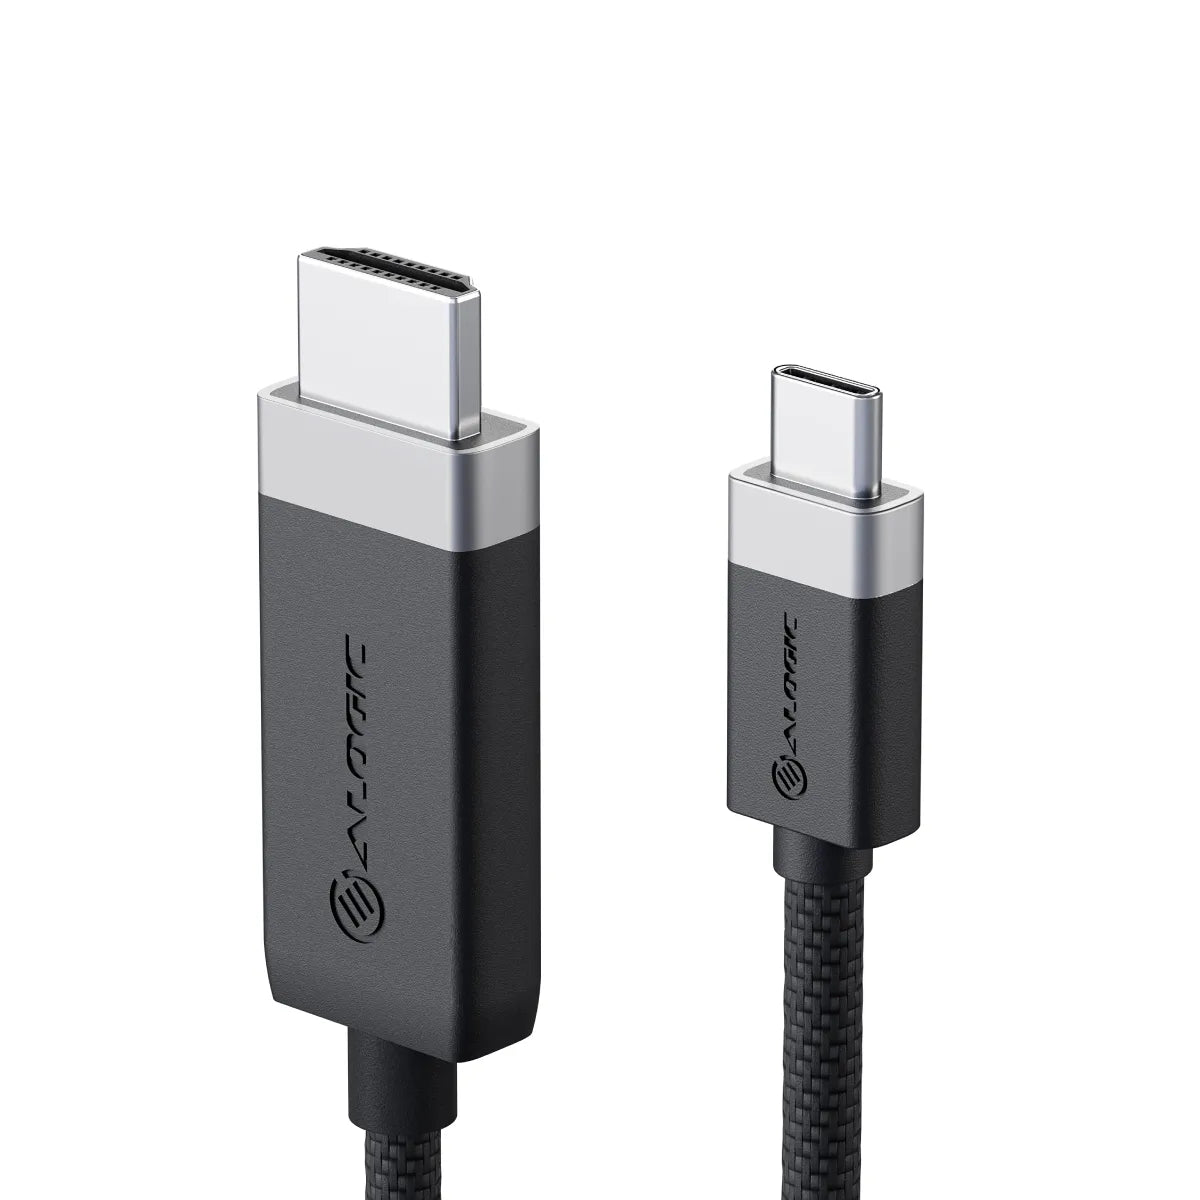 fusion-usb-c-to-hdmi-cable1